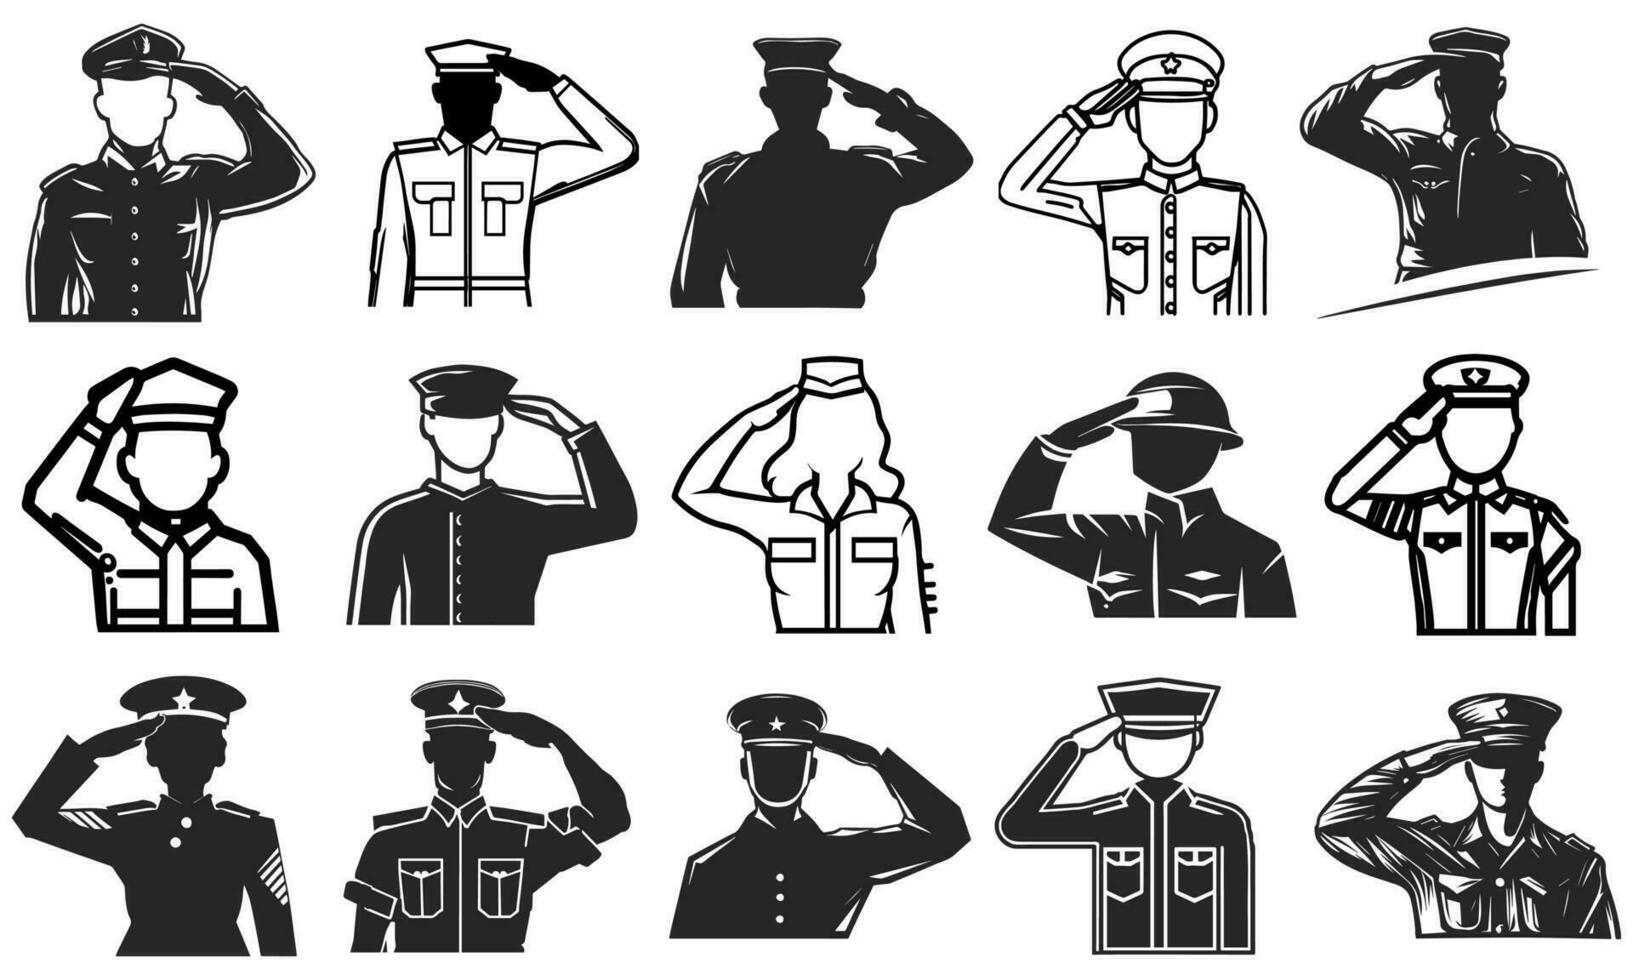 army general silhouette with hand gesture saluting vector